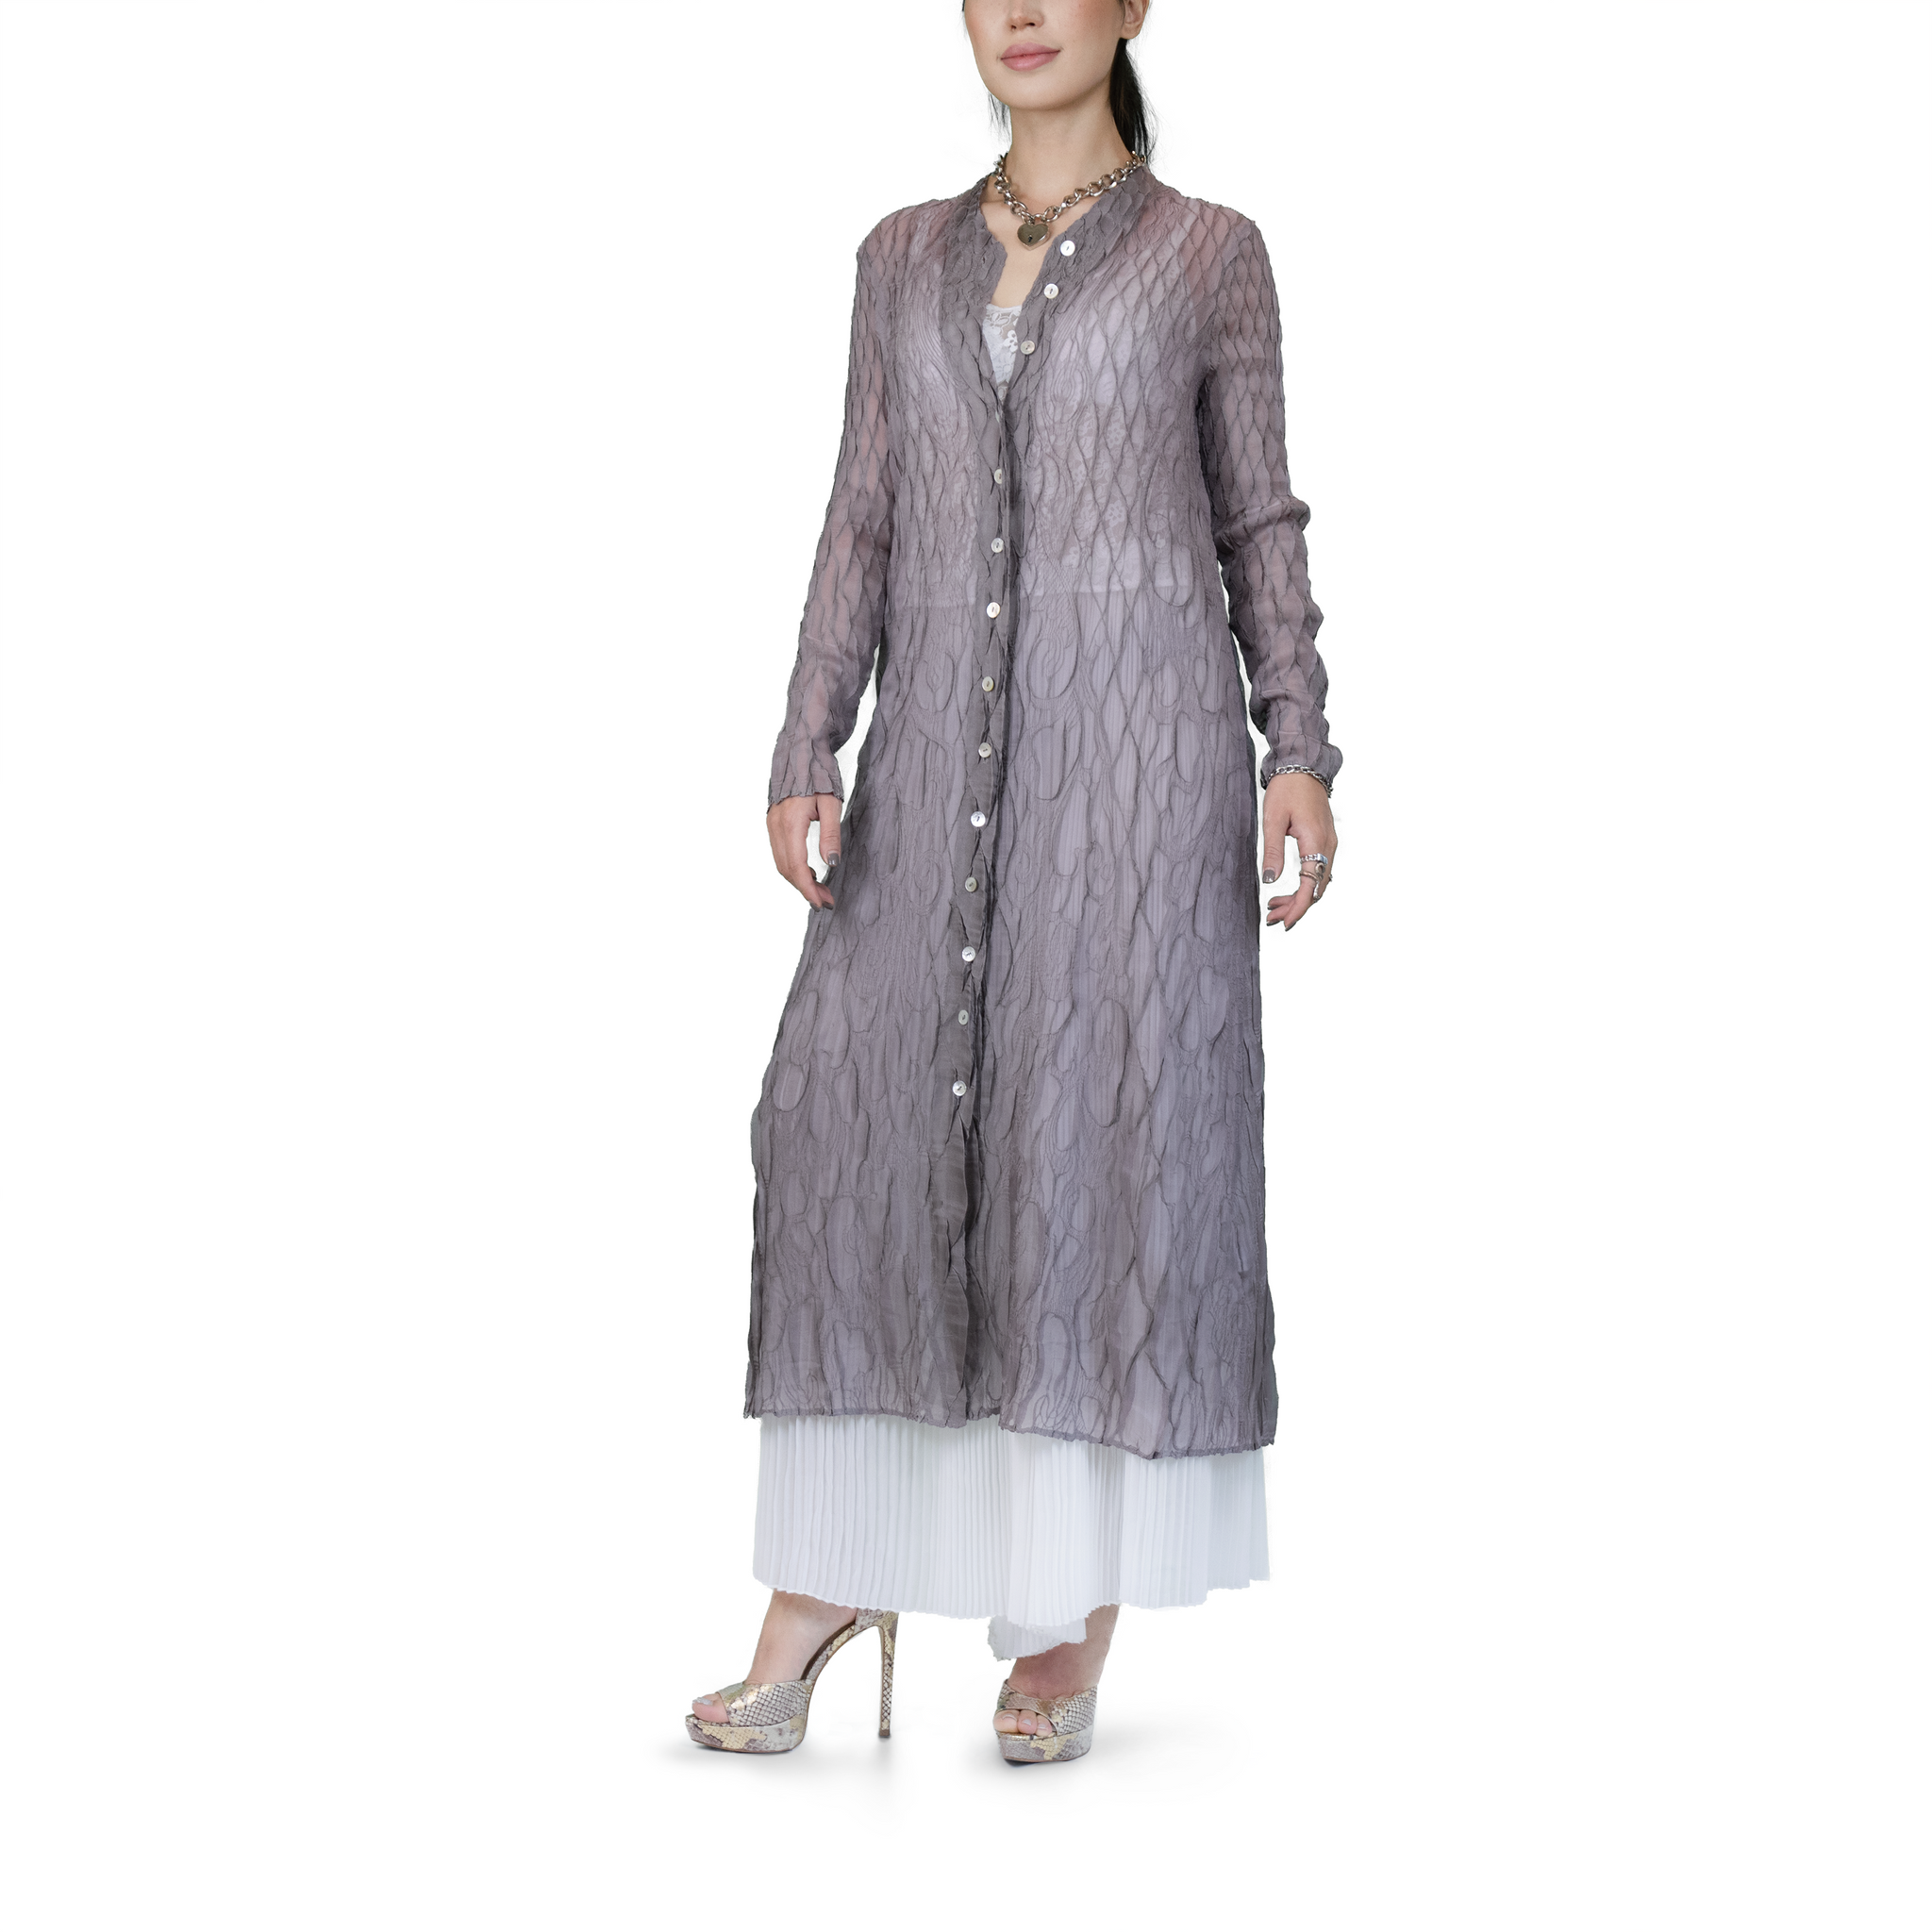 Diamond grid textured button-up ethereal coat